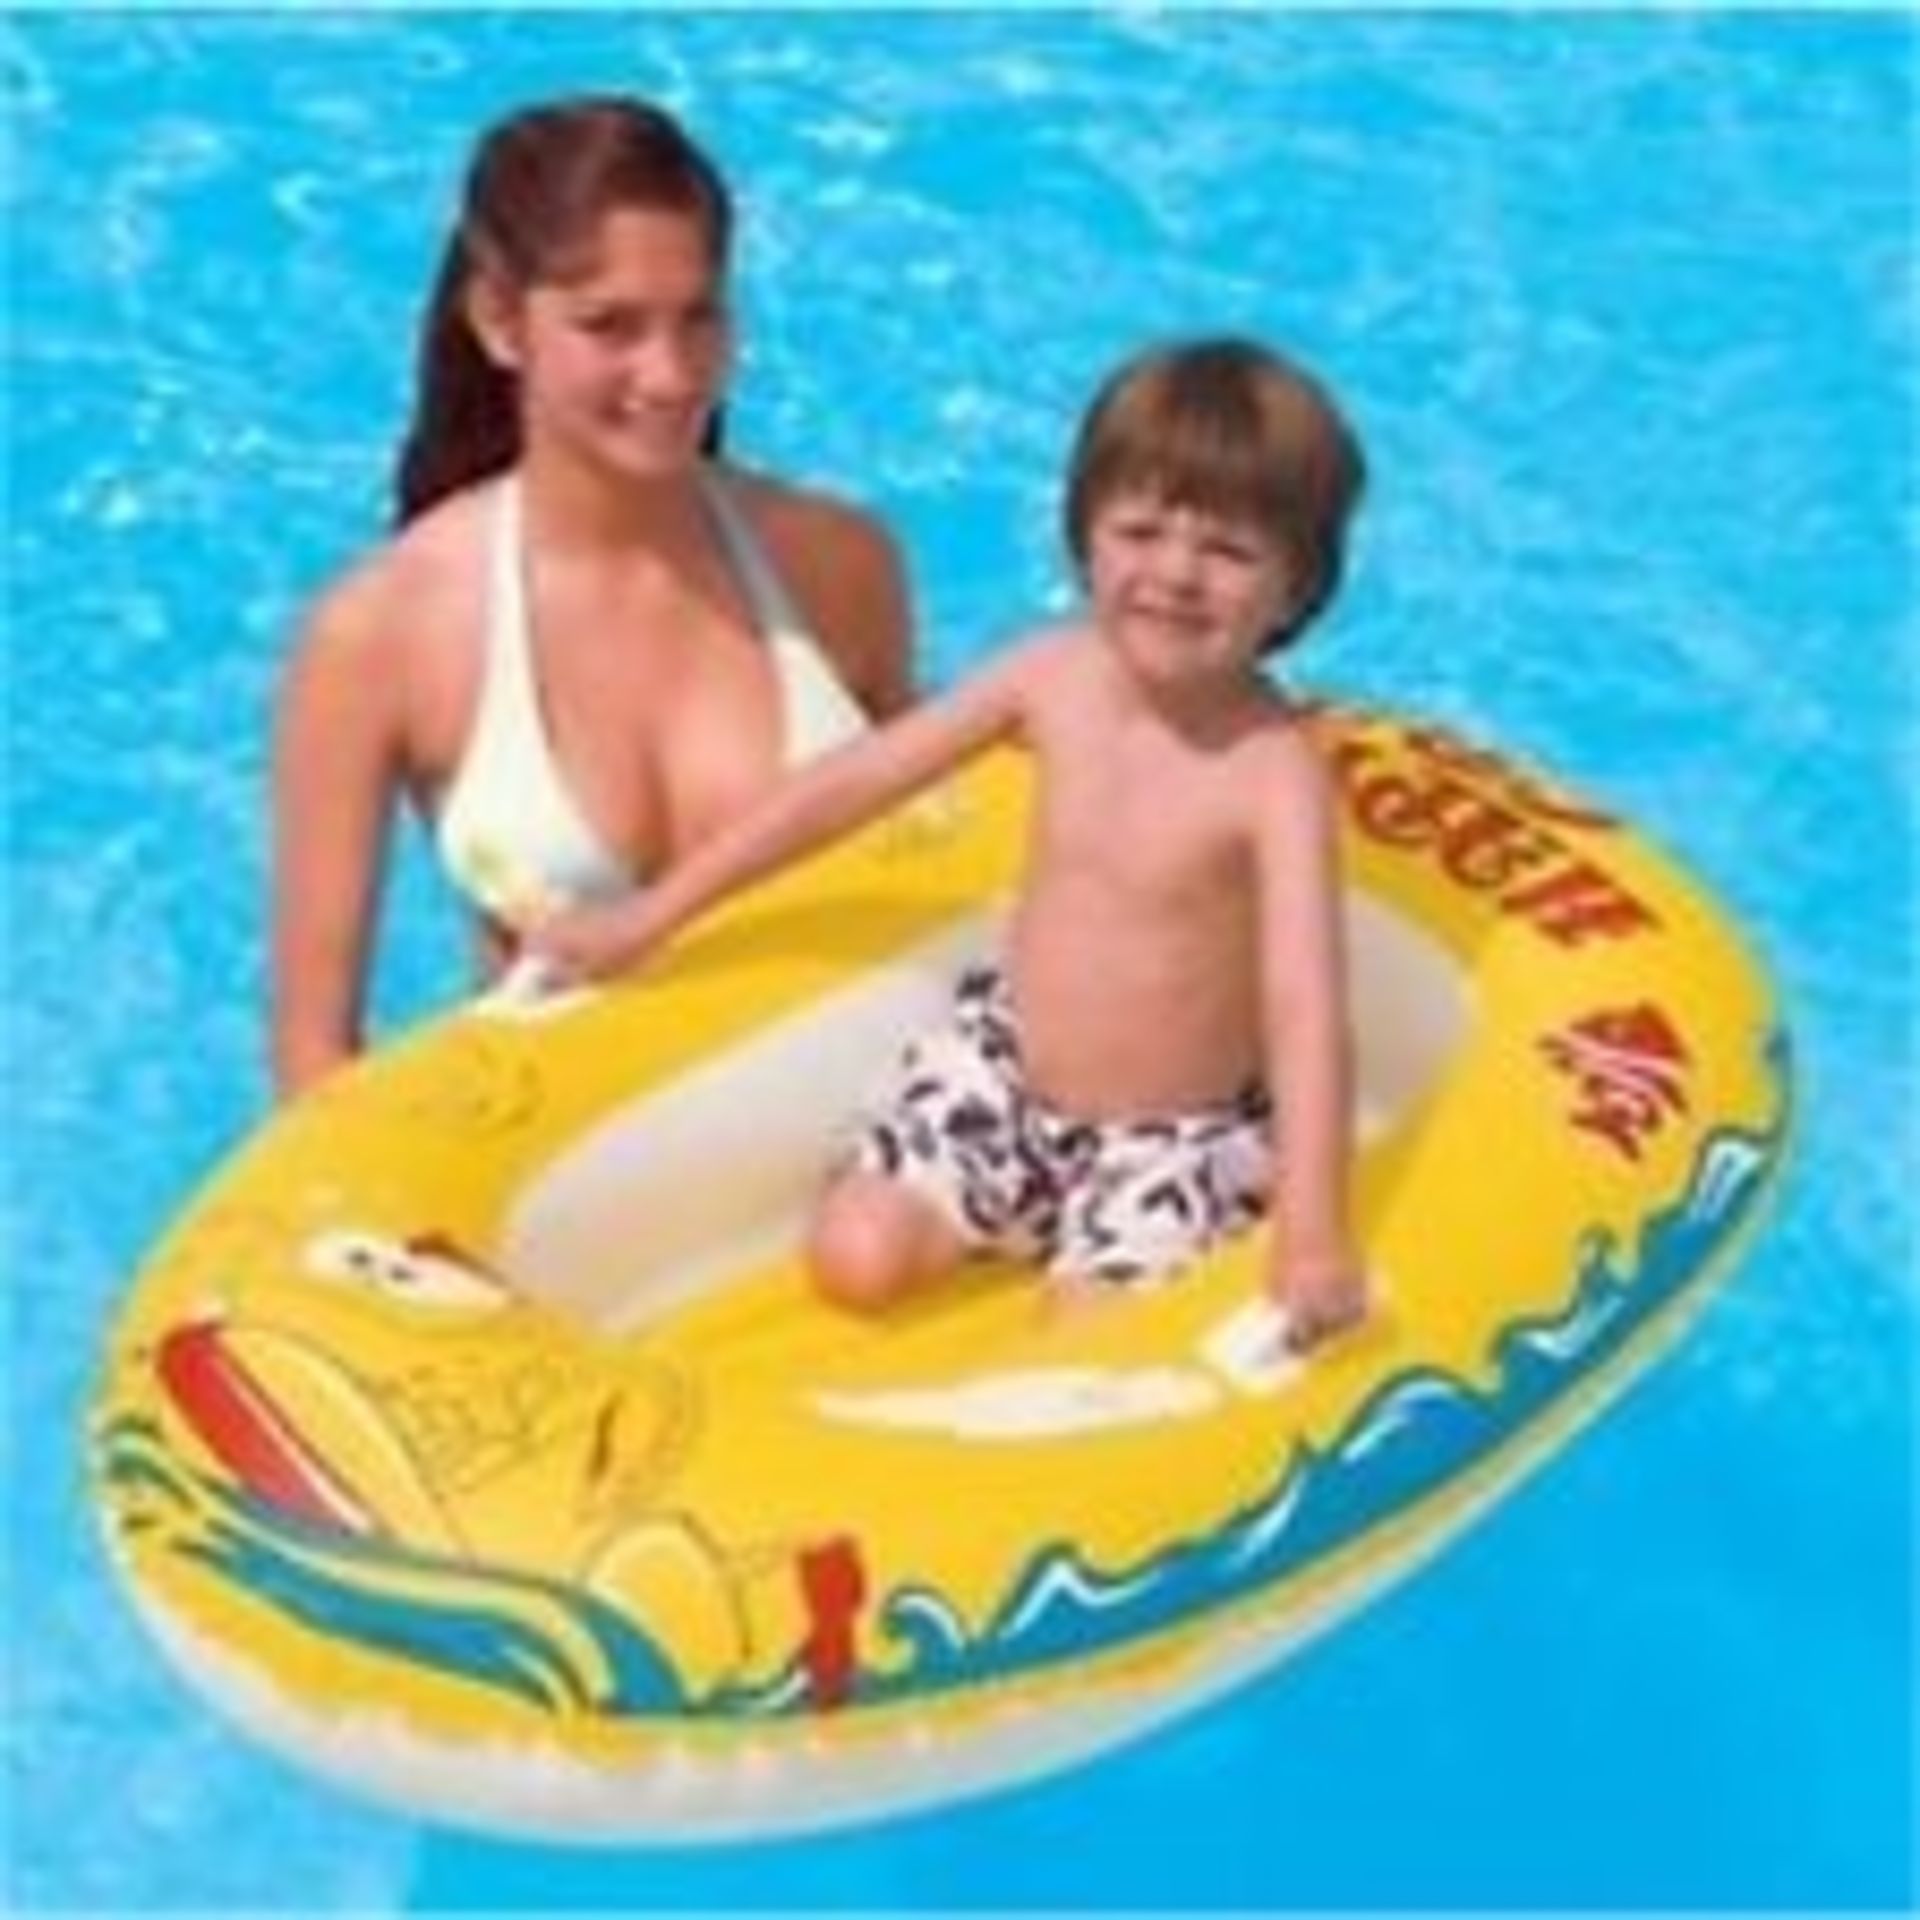 1 x Bestway 54" Inflatable Rubber Dinghy Boat Raft Pool Toy - New & Boxed -  Ref: JIM021A -